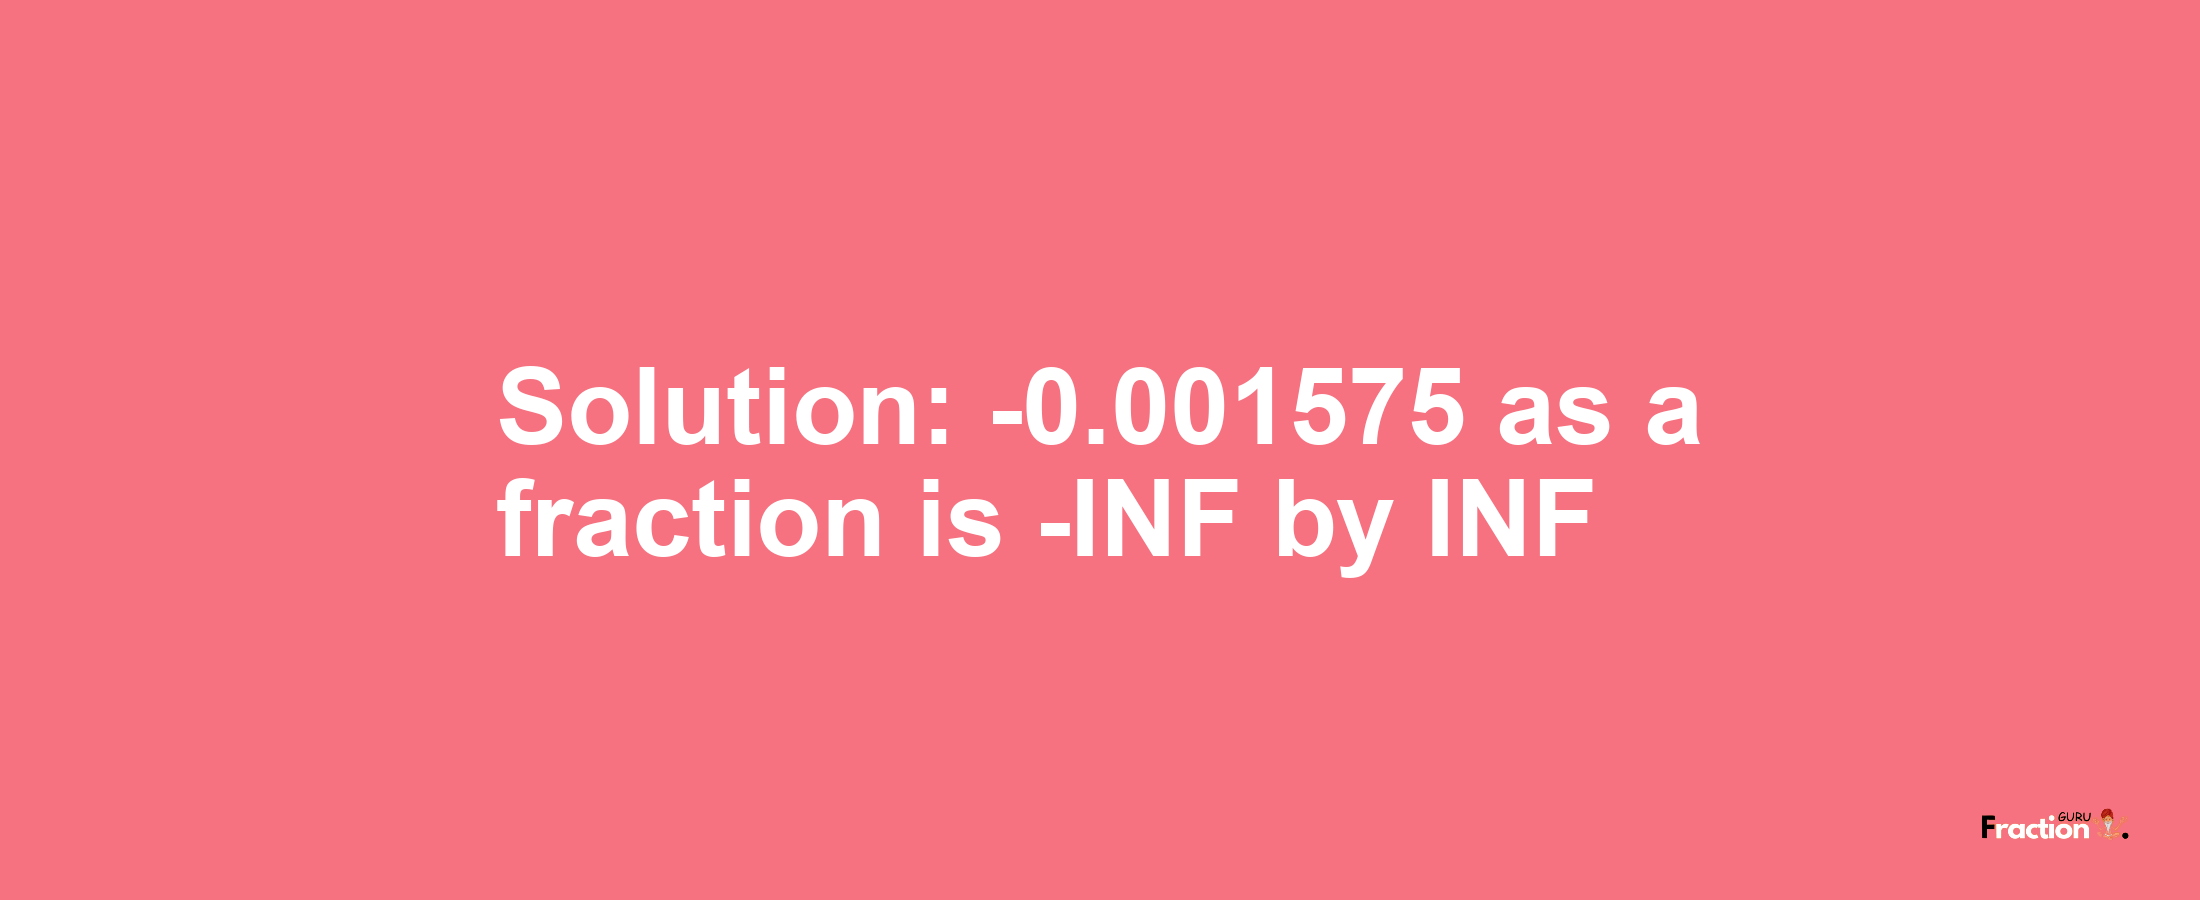 Solution:-0.001575 as a fraction is -INF/INF